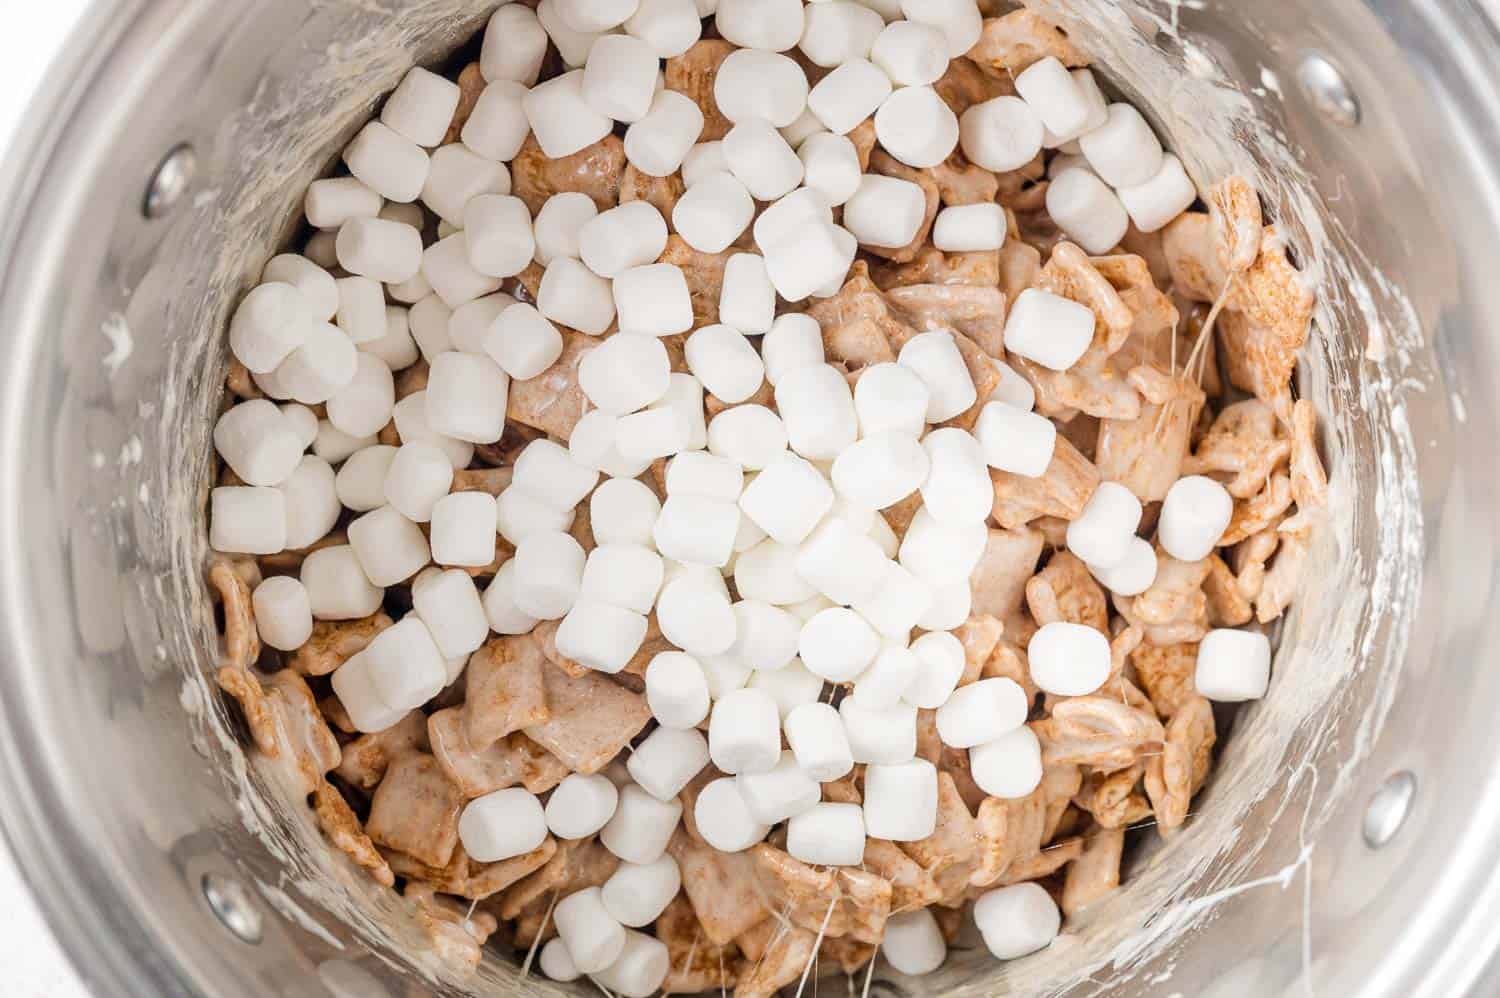 Mini marshmallows added to marshmallow and cereal mixture.